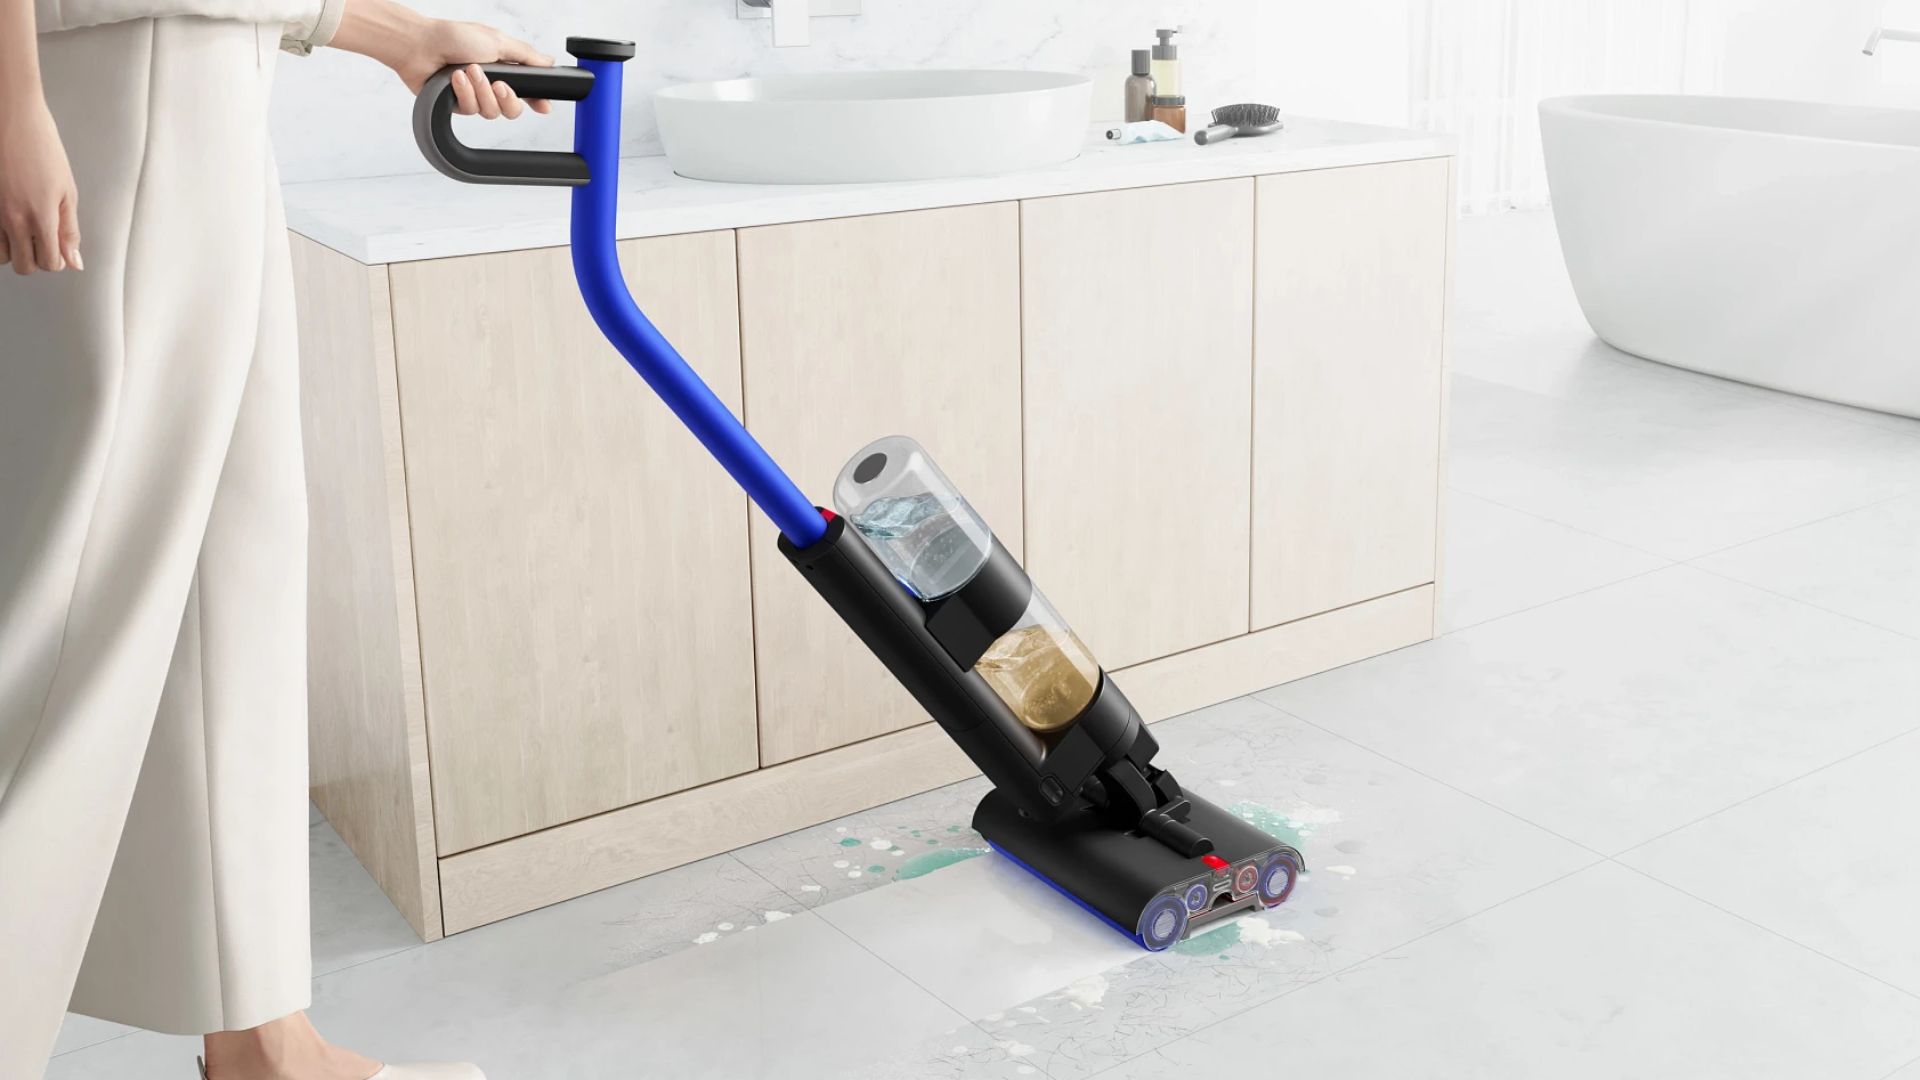 The Dyson WashG1 being used in a bathroom